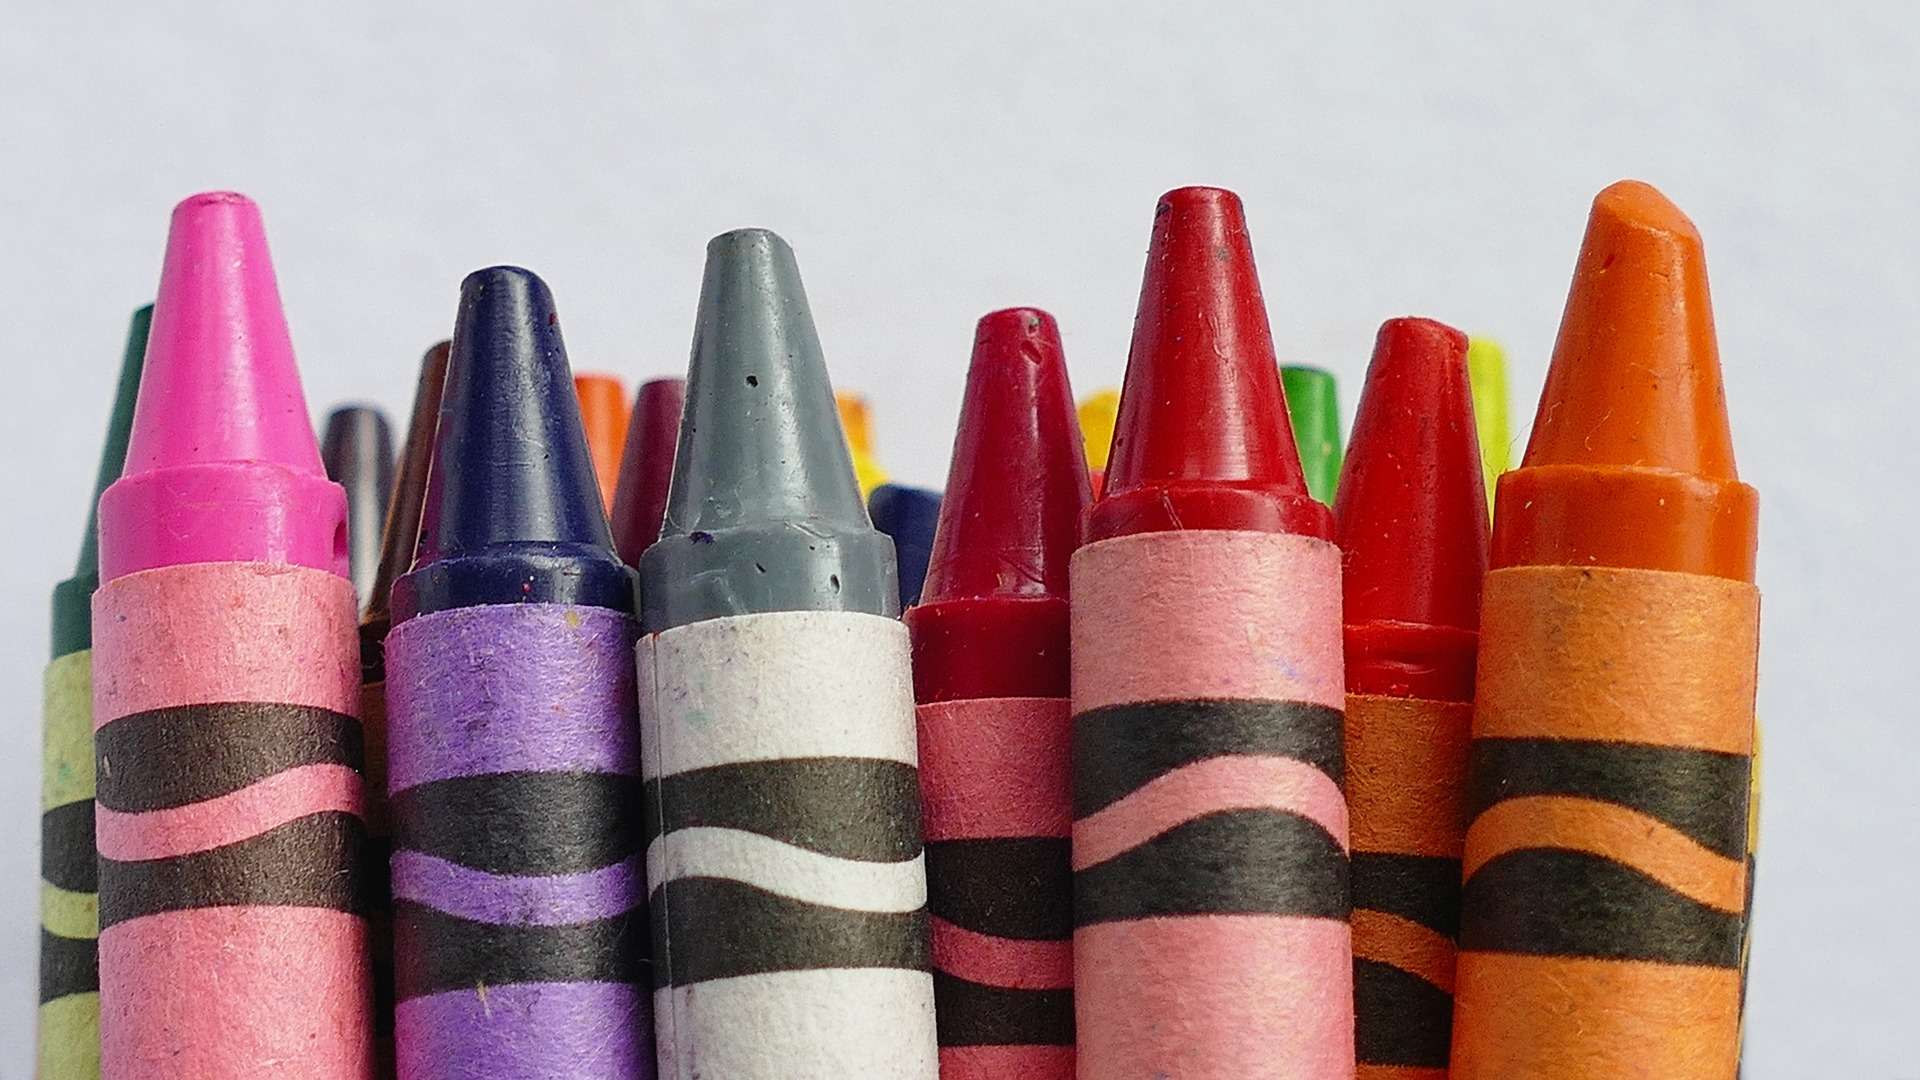 Are Crayons Made Of Wax